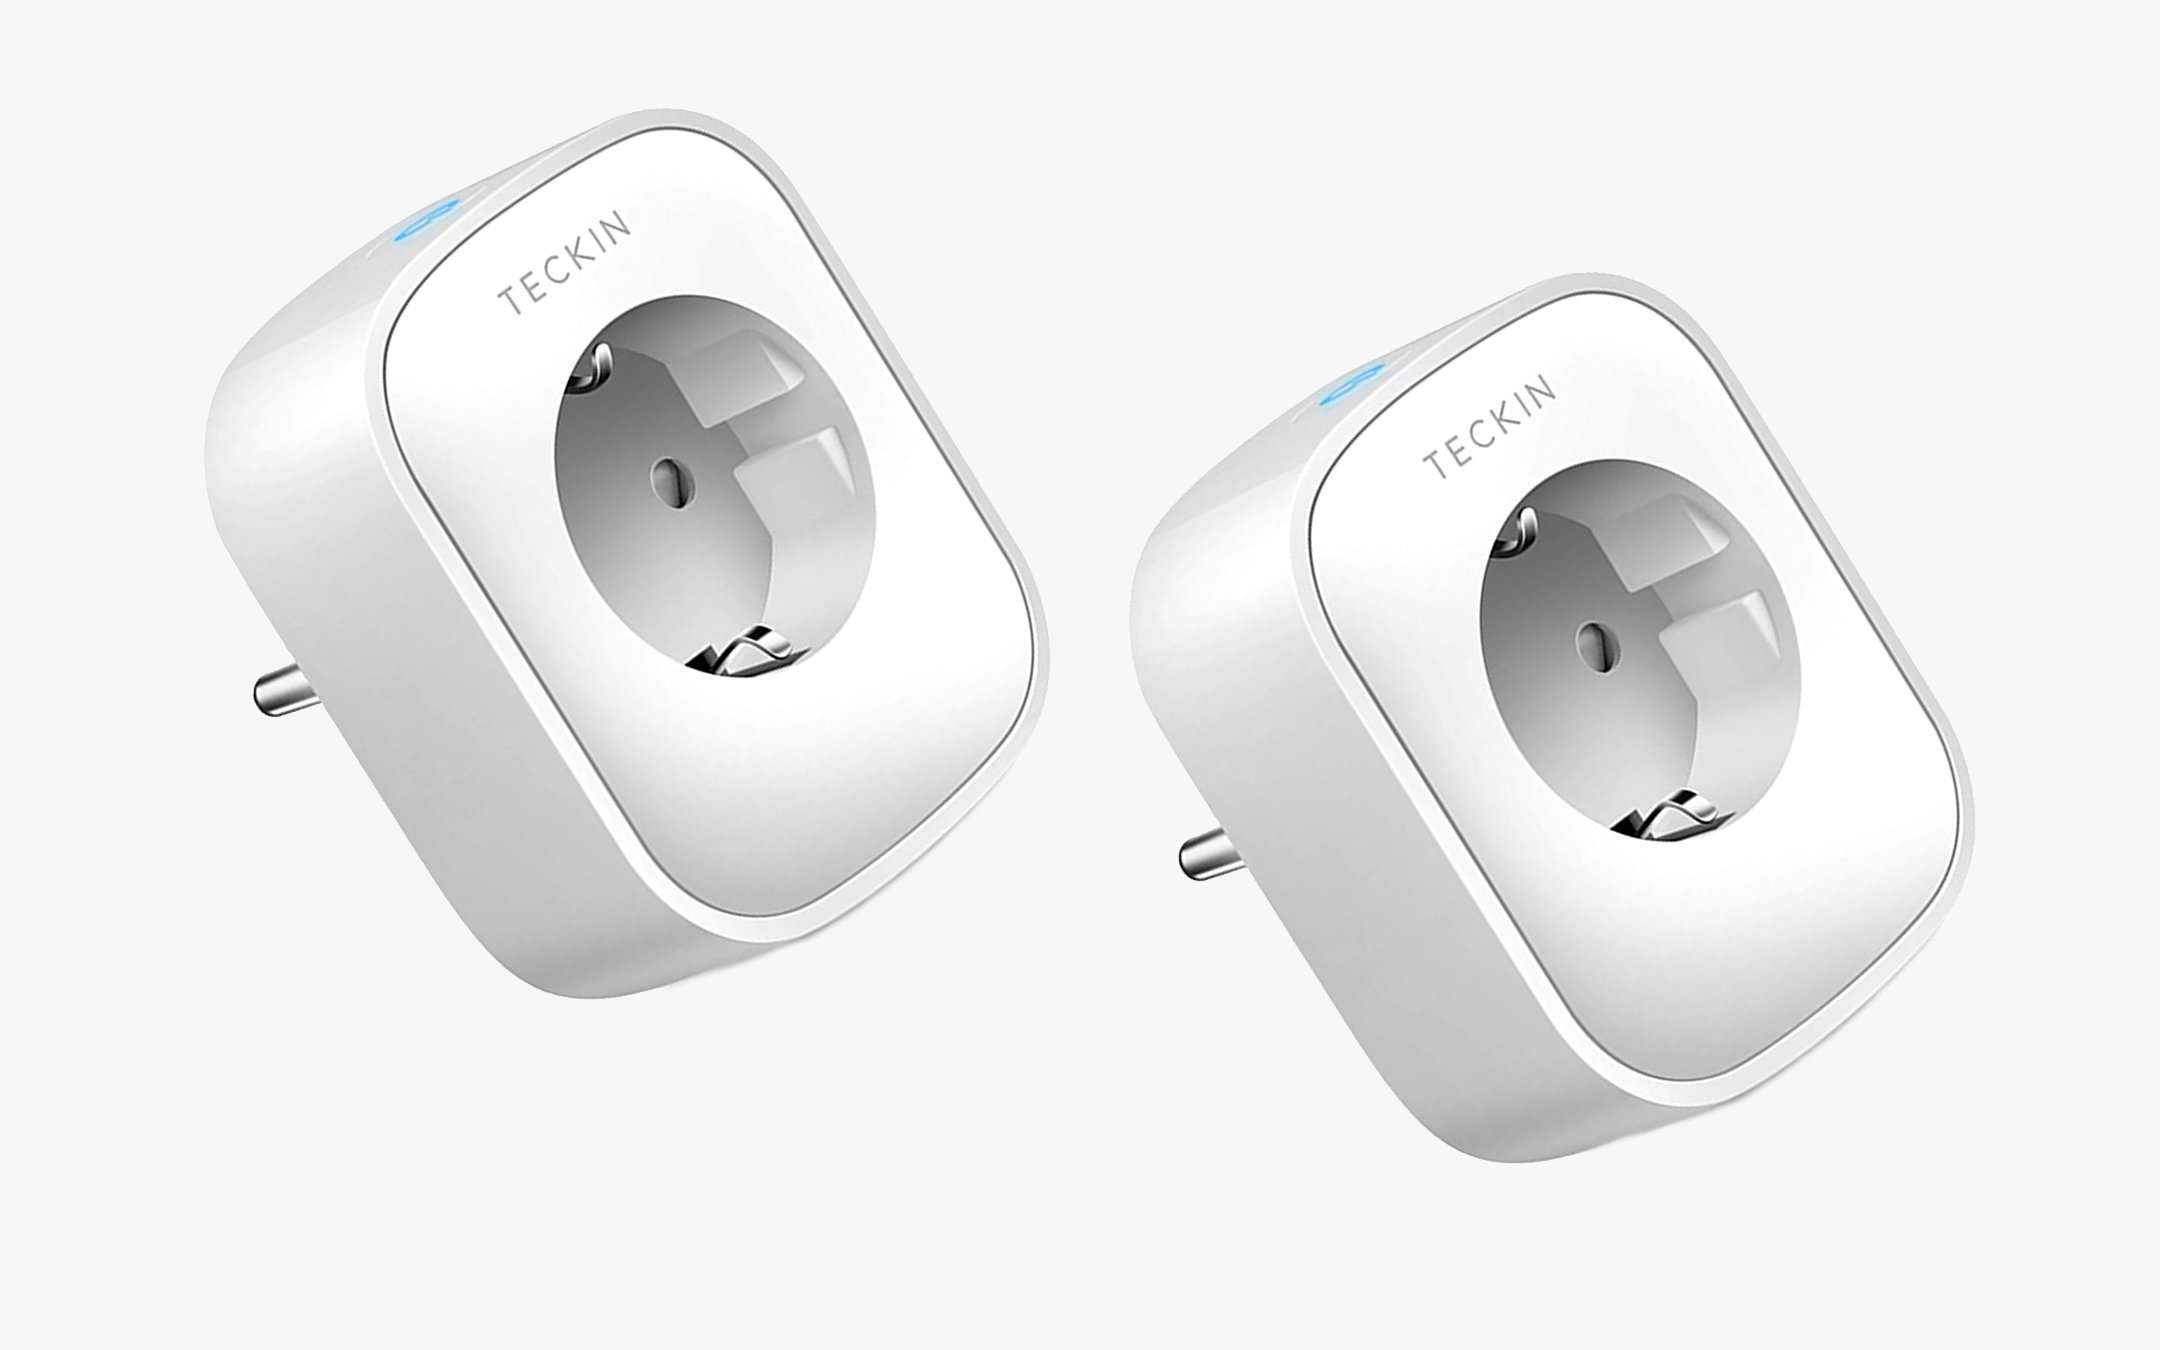 Teckin, smart outlet with a discount that saves money